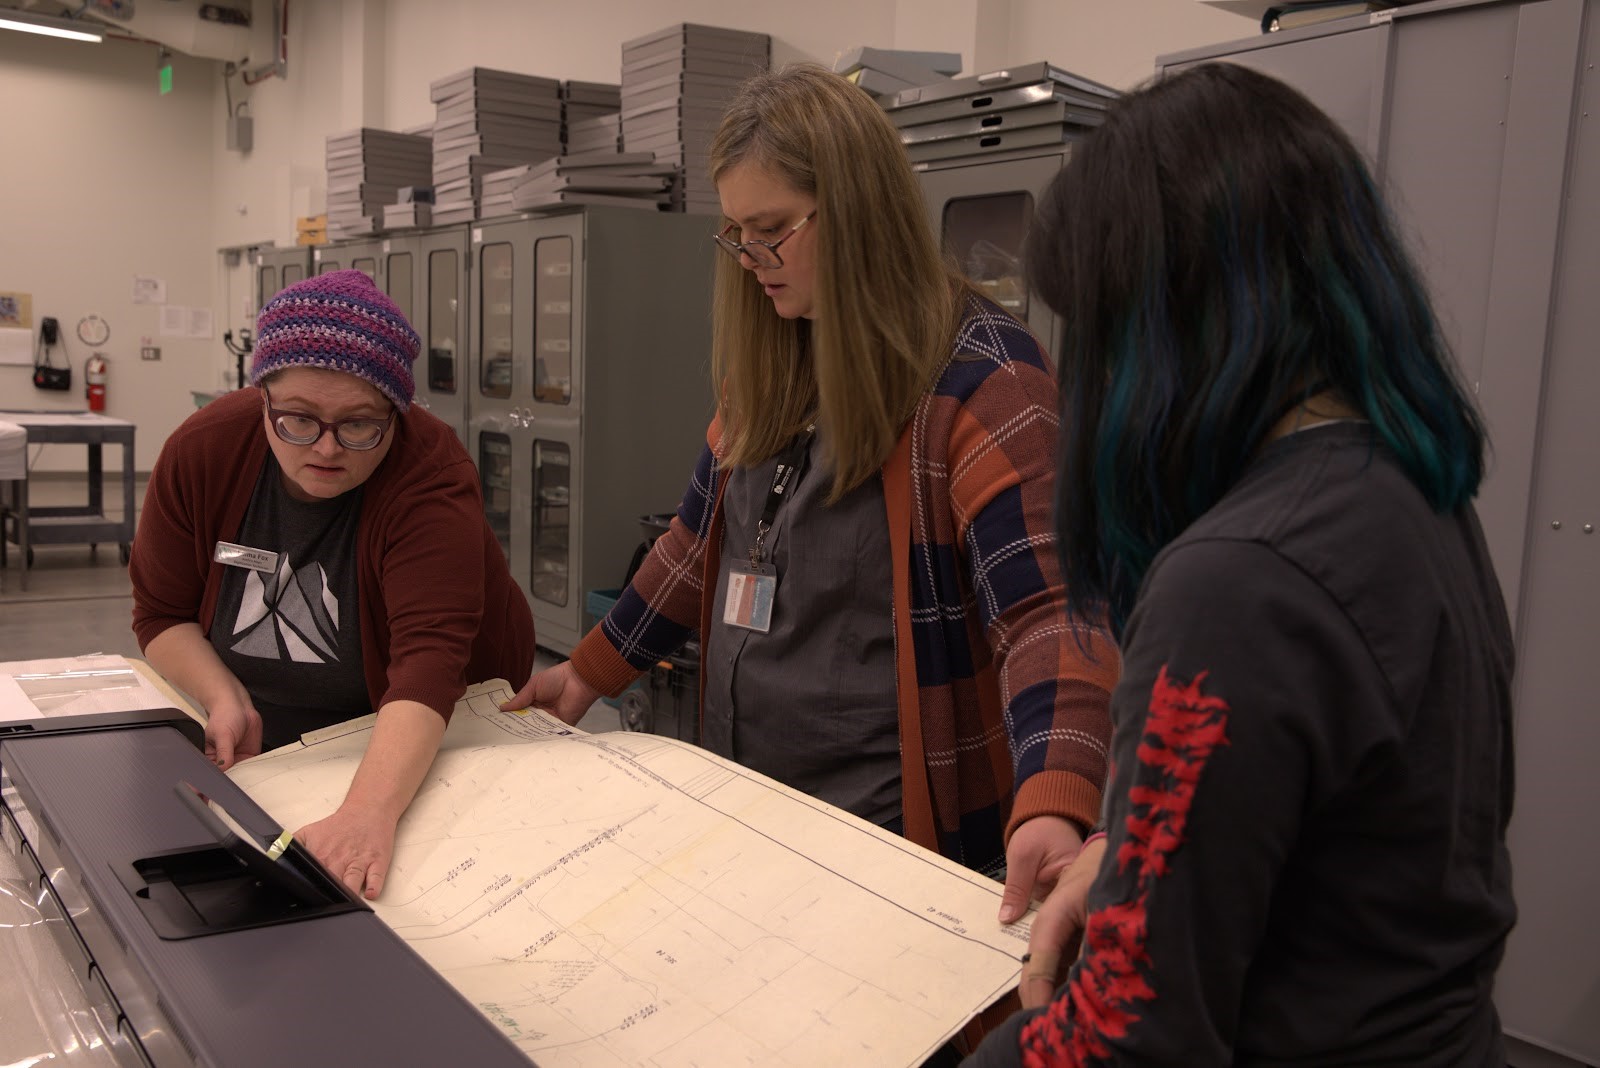 Emma Fox, Katie Saunders, and Jamie Nakano scan an archaeological map using a Contex SD MF 44 scanner designed for large scale documents.